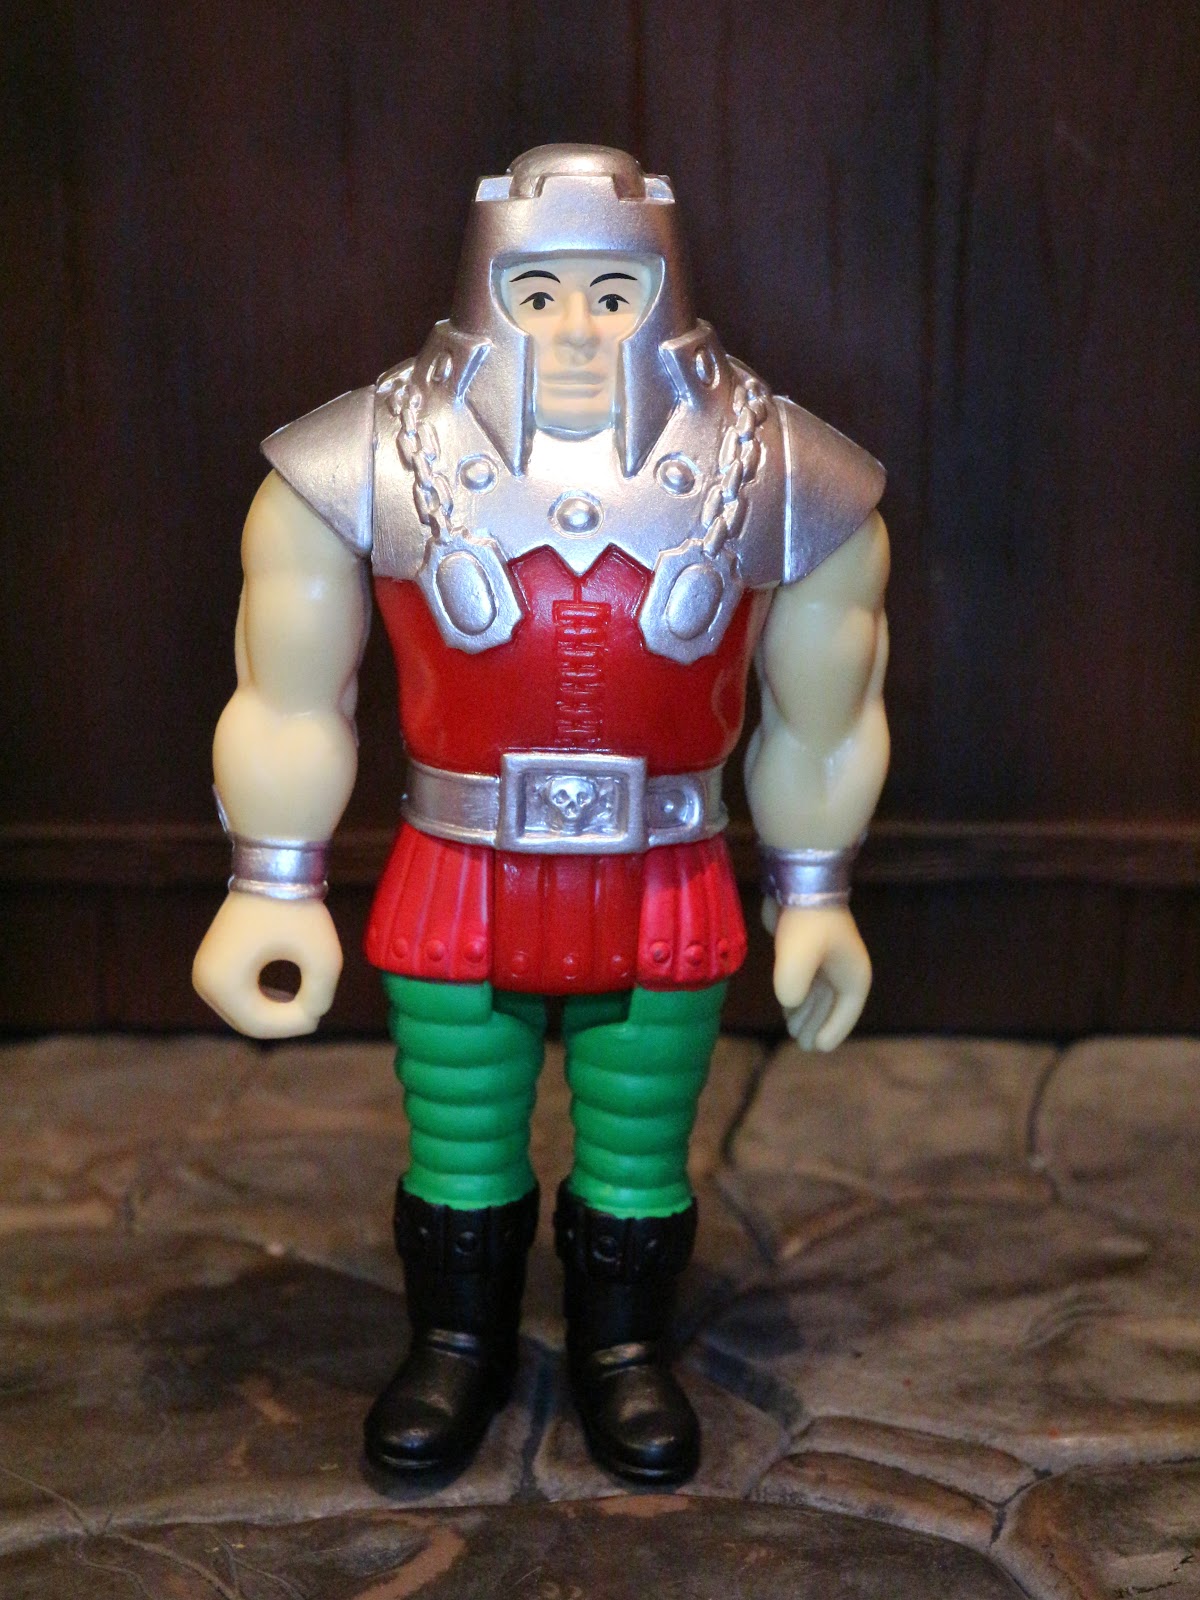 2017 Super7 ReAction Masters of the Universe  RAM MAN 4" Inch Action Figure MOC